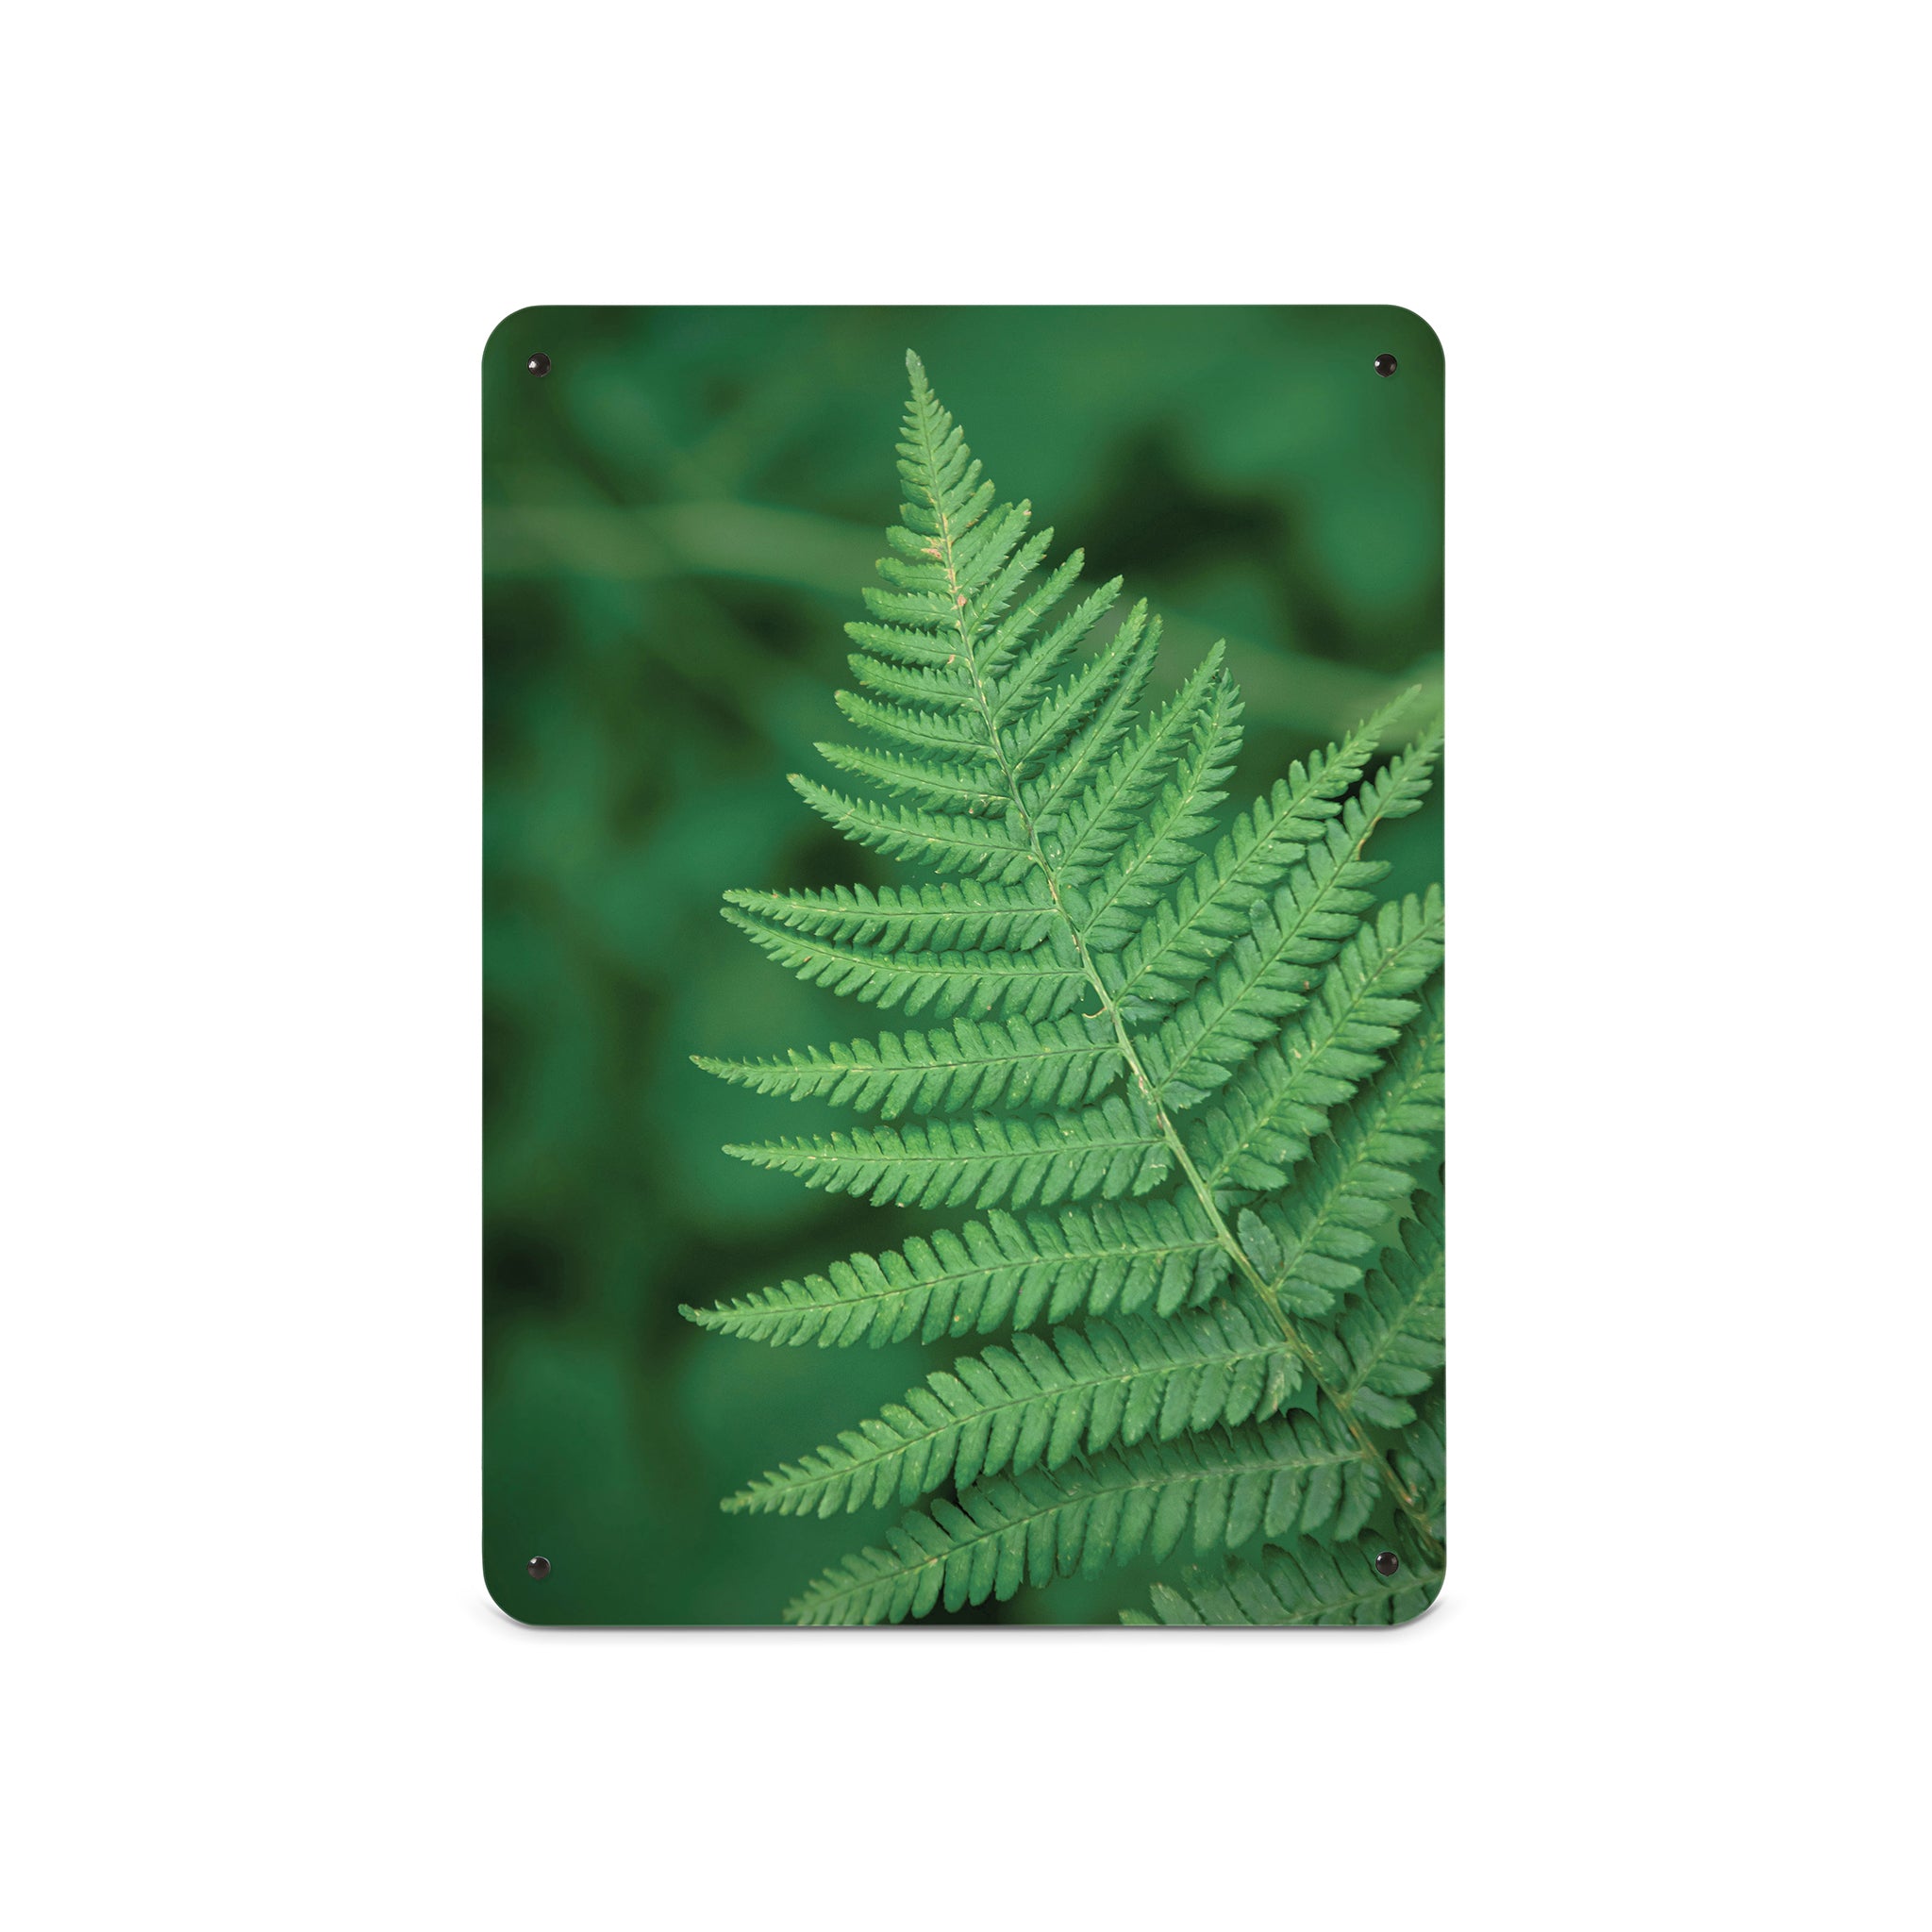 A medium magnetic notice board by Beyond the Fridge with a photograph of a green fern